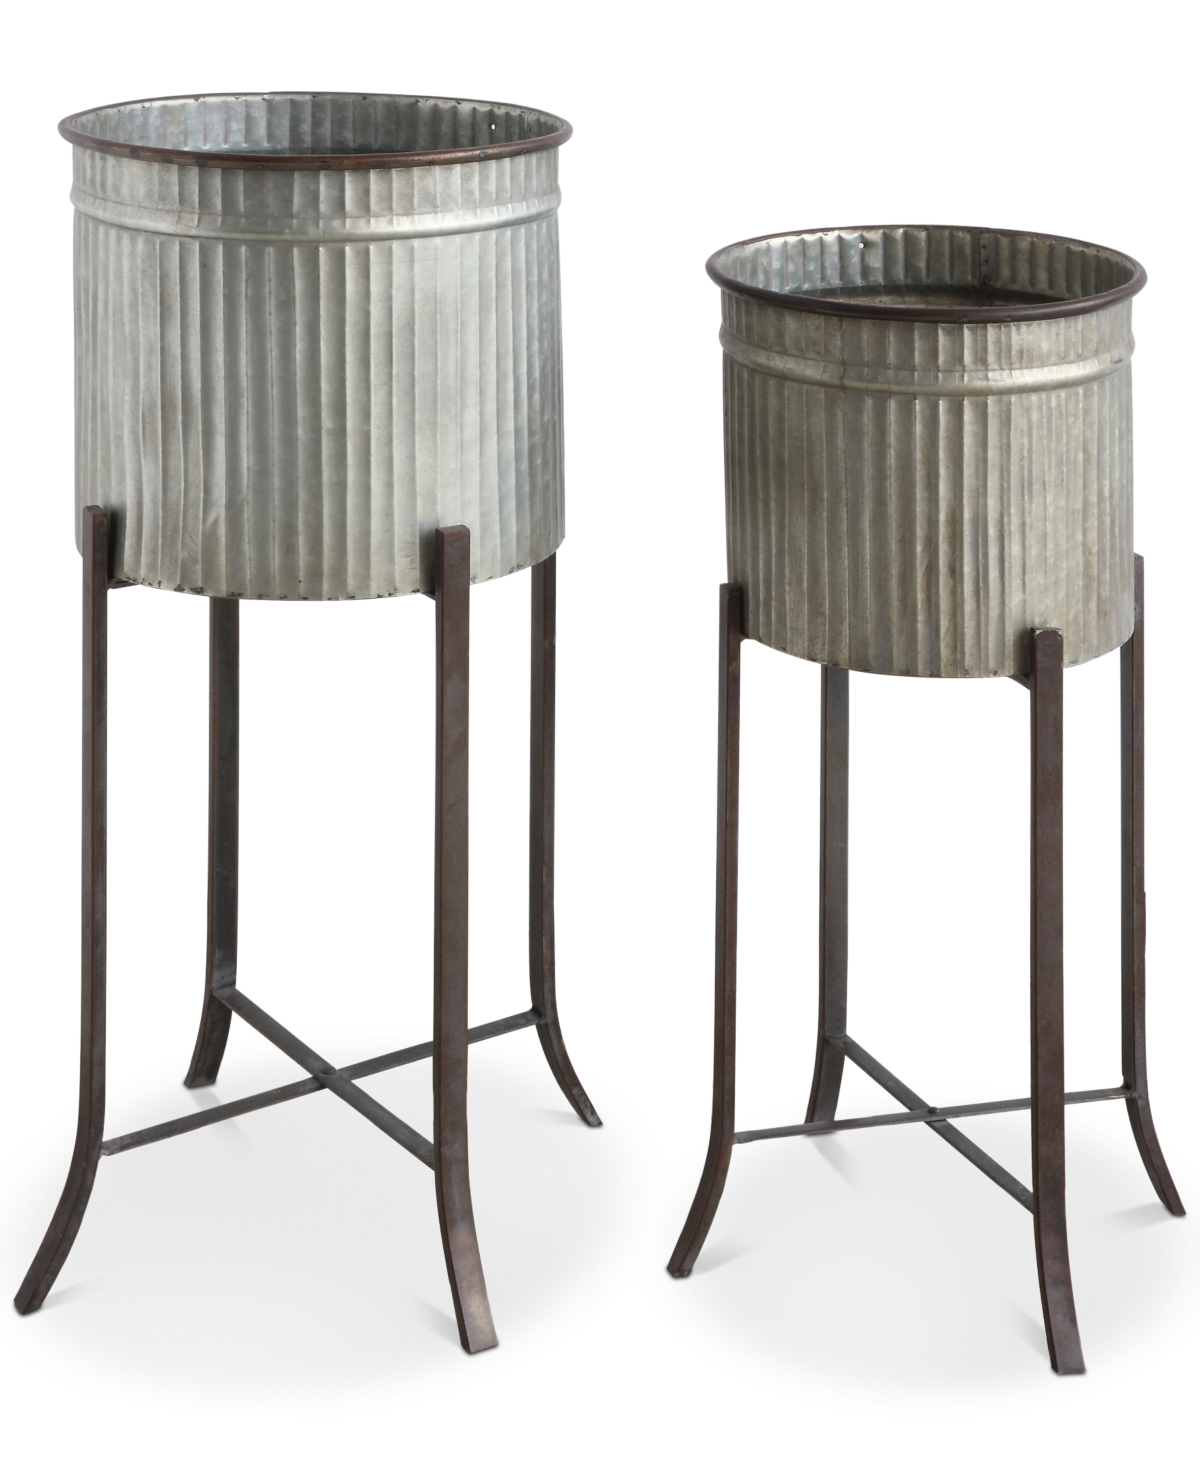 Round Corrugated Metal Planters on Stands, Silver and Black, Set of 2 - Silver